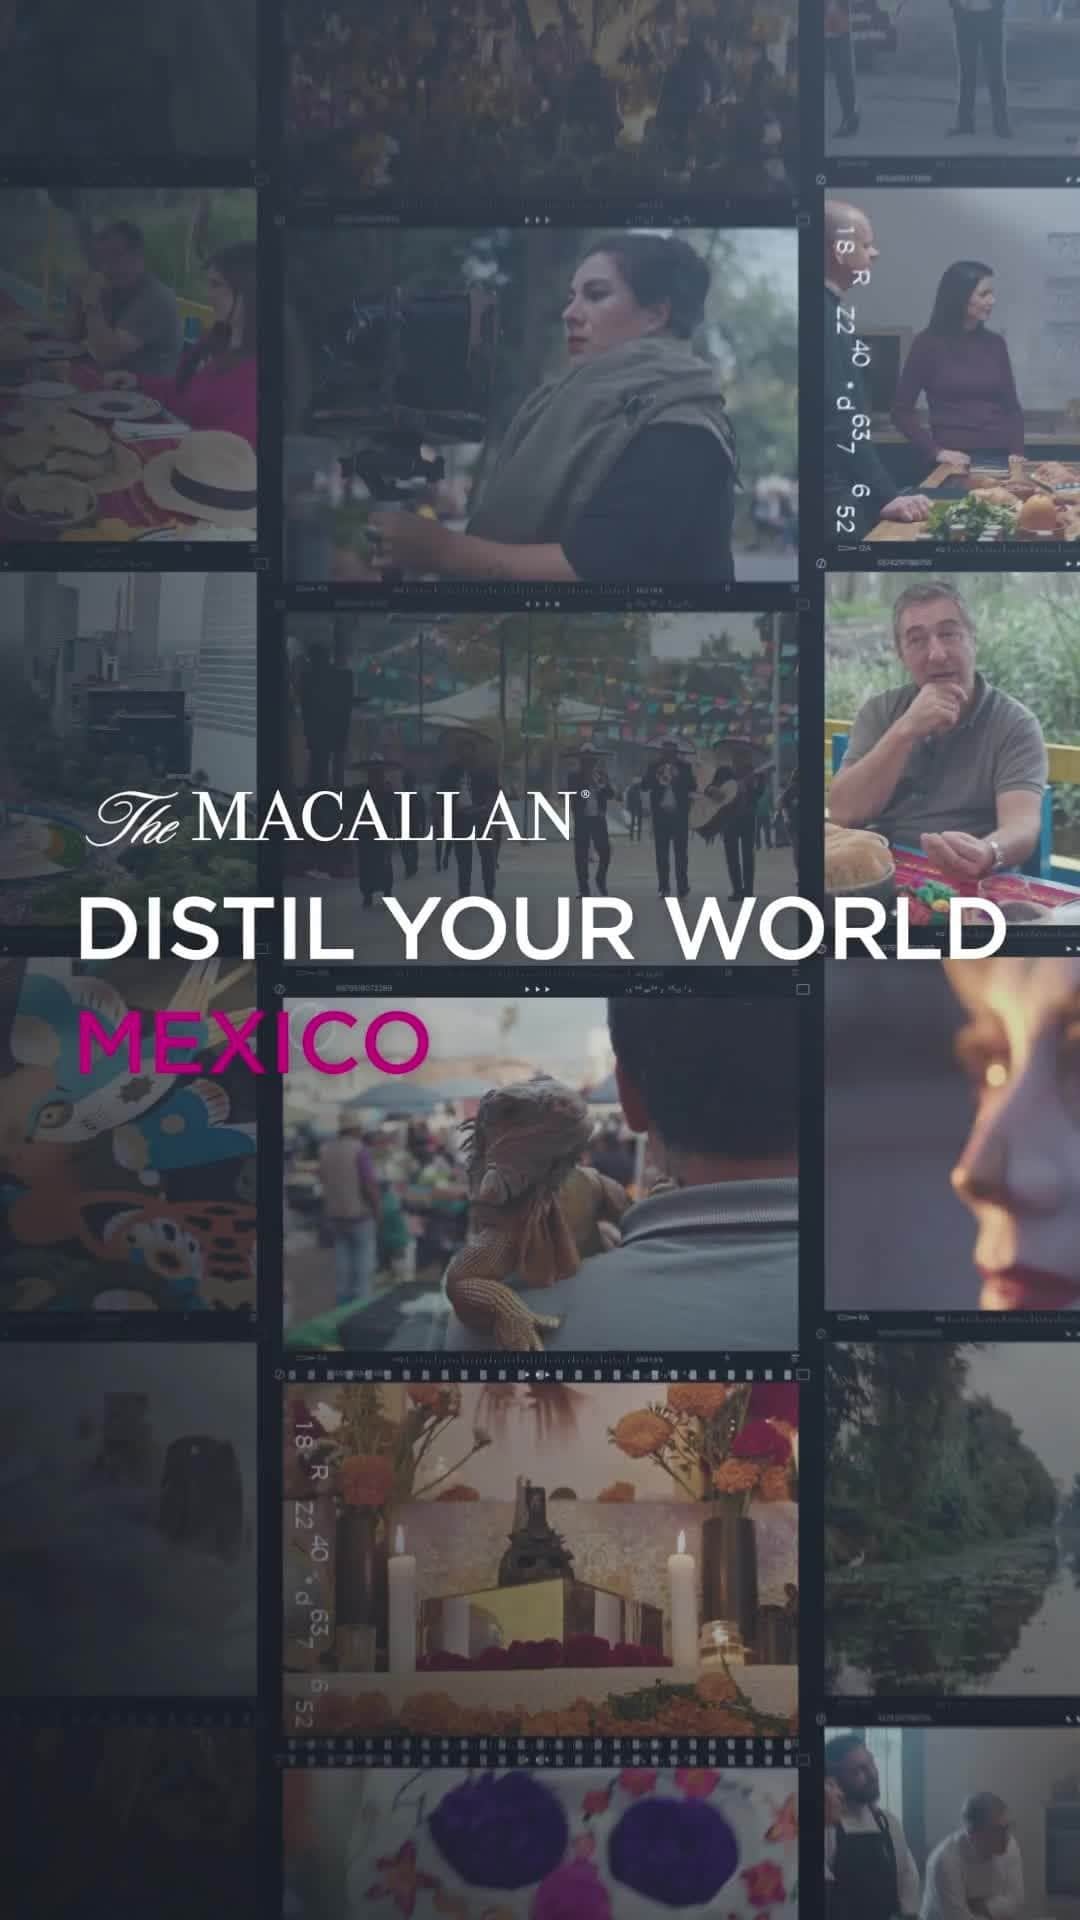 The Macallanのインスタグラム：「Embark on a sensorial journey with Distil Your World Mexico. Featuring notes of Sugared Pan de Muerto, creamy vanilla, and sweet pineapple, this exceptional single malt whisky captures the people and traditions through one of Mexico’s most vibrant celebrations – Day of the Dead. ⁣ ⁣ Crafted without compromise. Please savour The Macallan responsibly.⁣ ⁣ #TheMacallan #DistilYourWorld #CellerCanRoca #TheRocaBrothers」